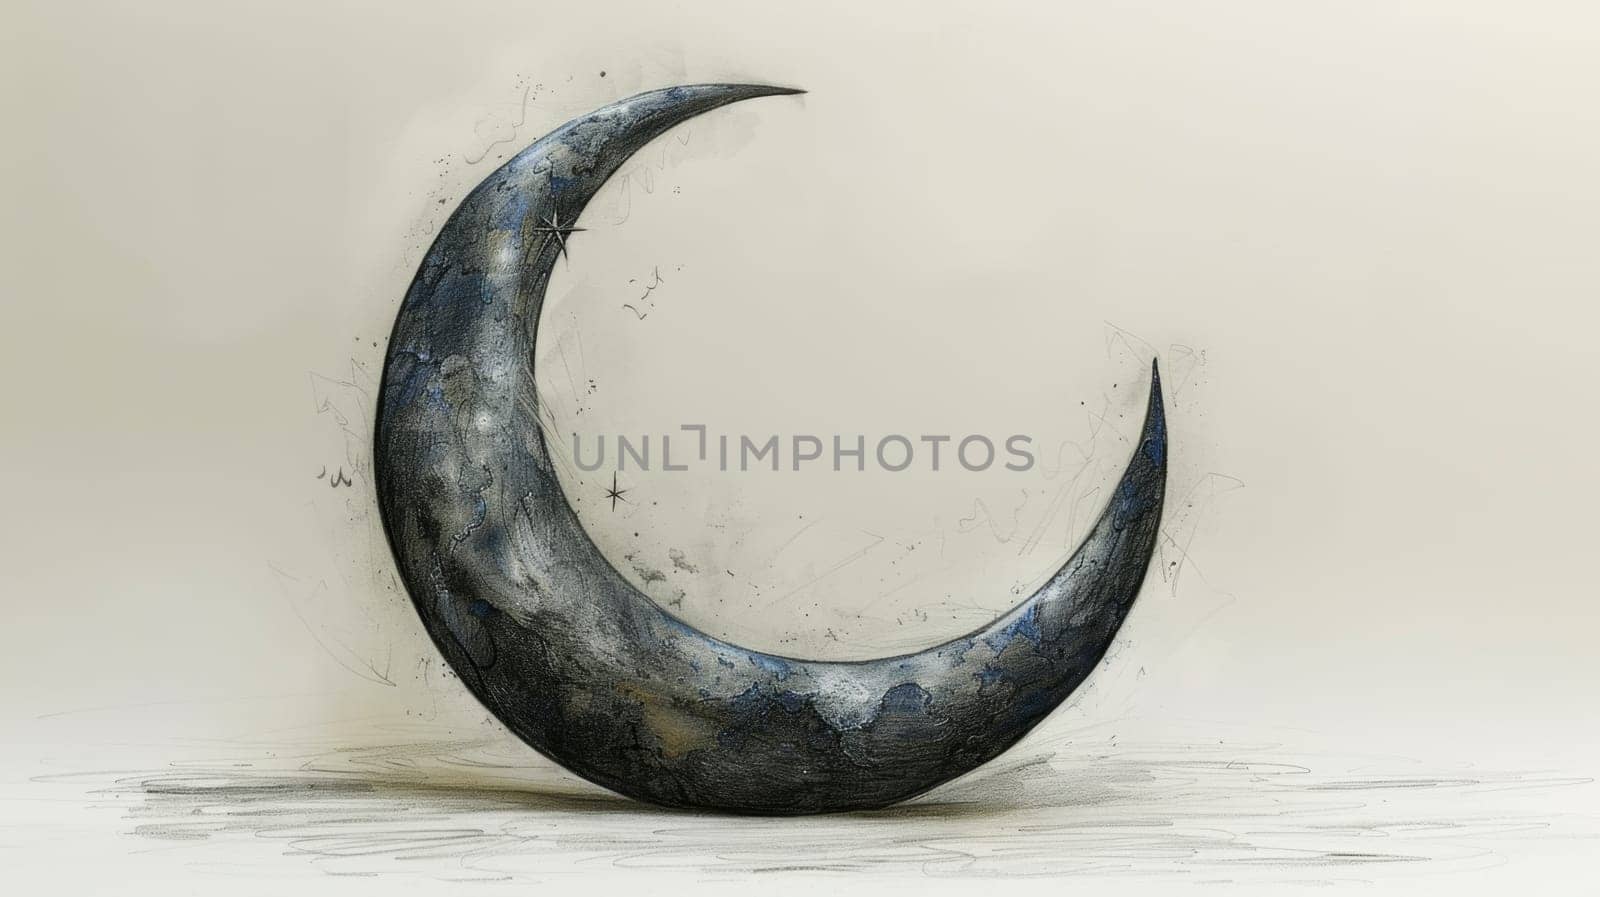 The symbol of the holy holiday of Eid al-Adha. A crescent moon and a star. The halal symbol.